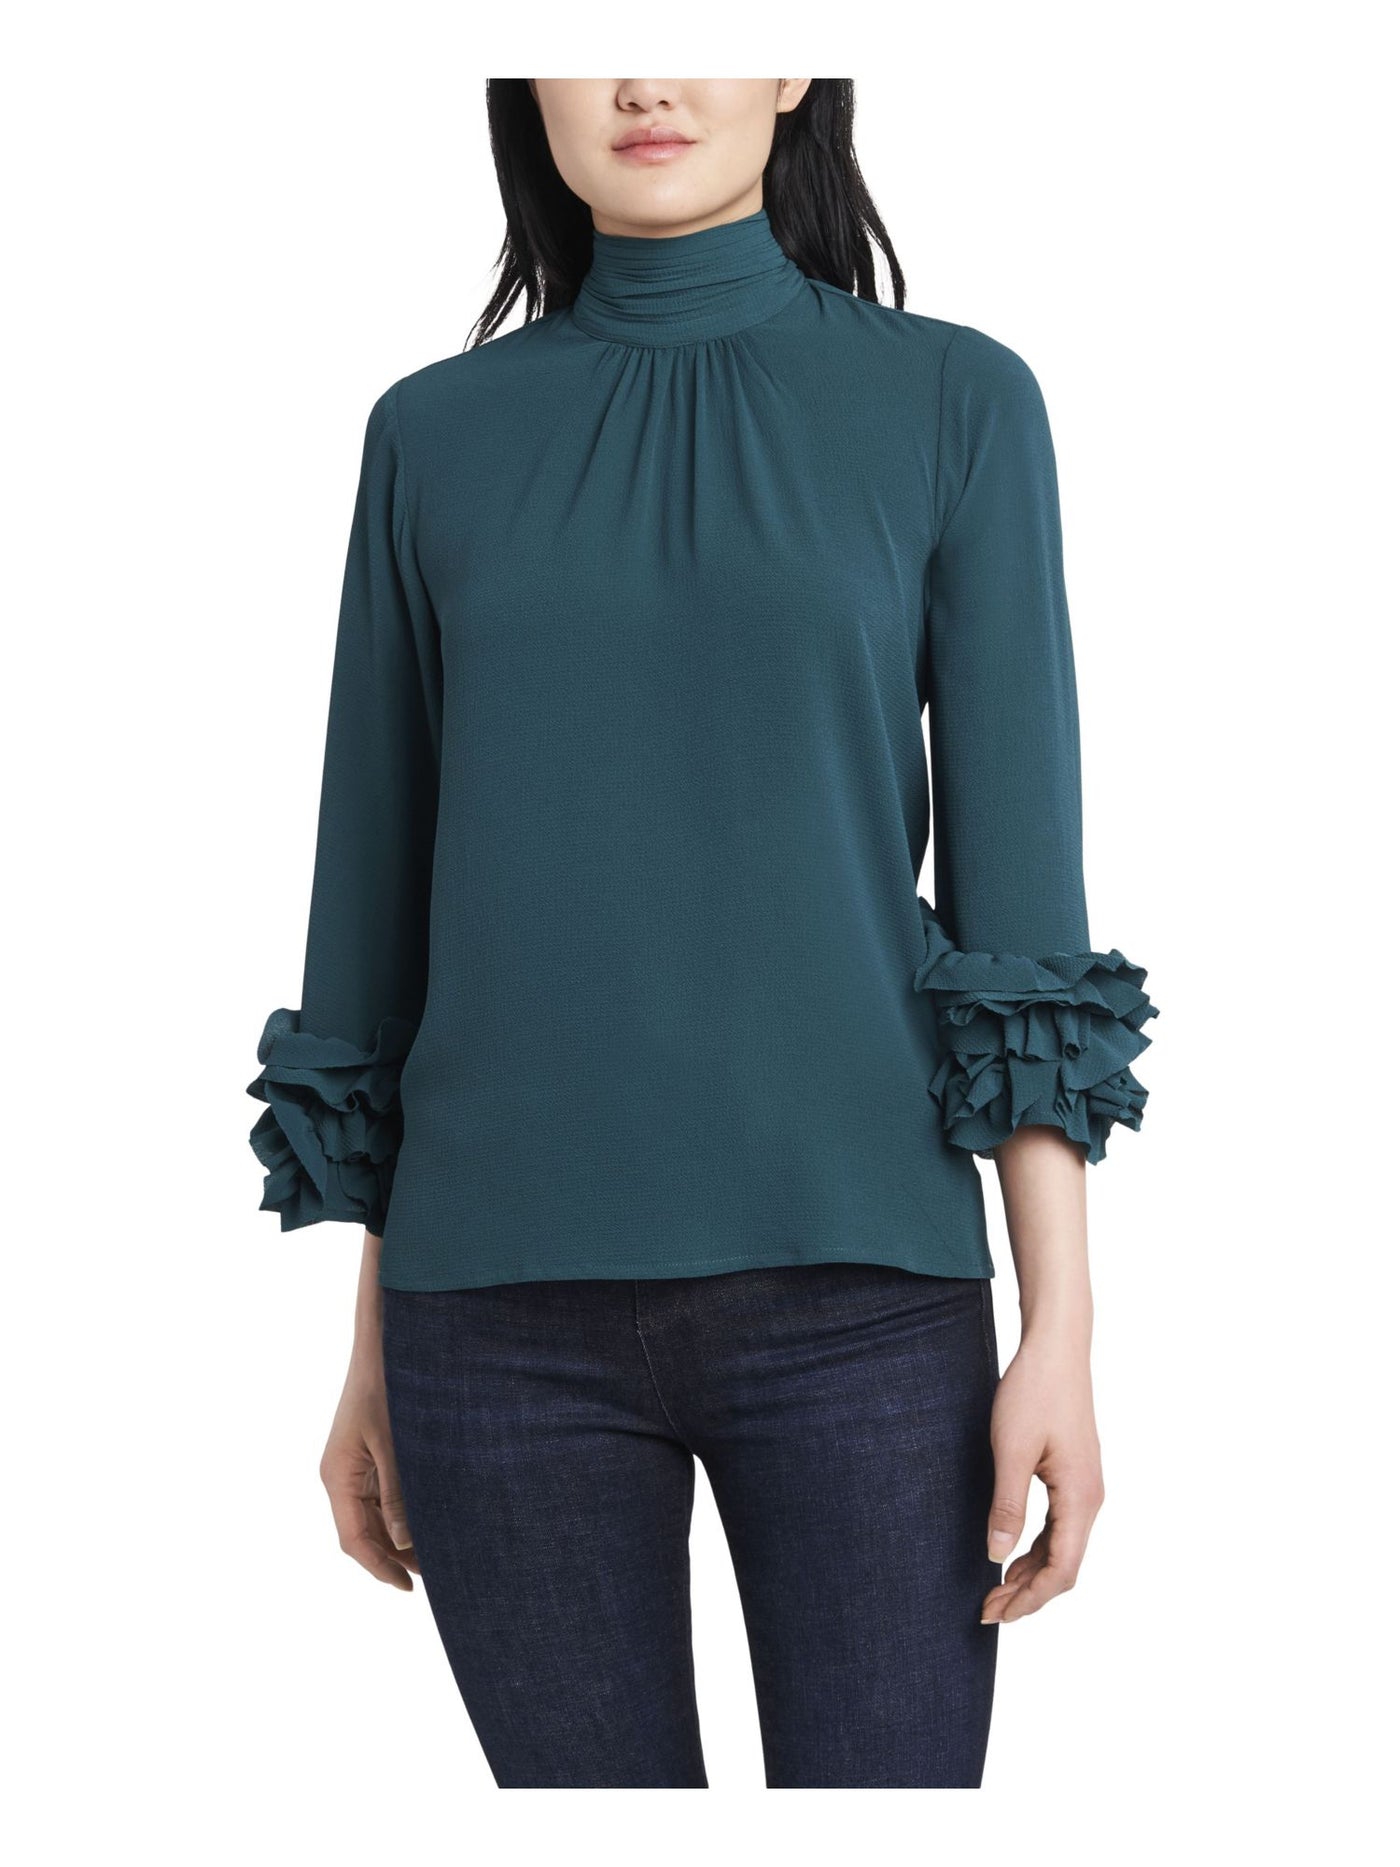 VINCE CAMUTO Womens Green Ruffled Gathered Keyhole Back 3/4 Sleeve Mock Neck Wear To Work Top XL